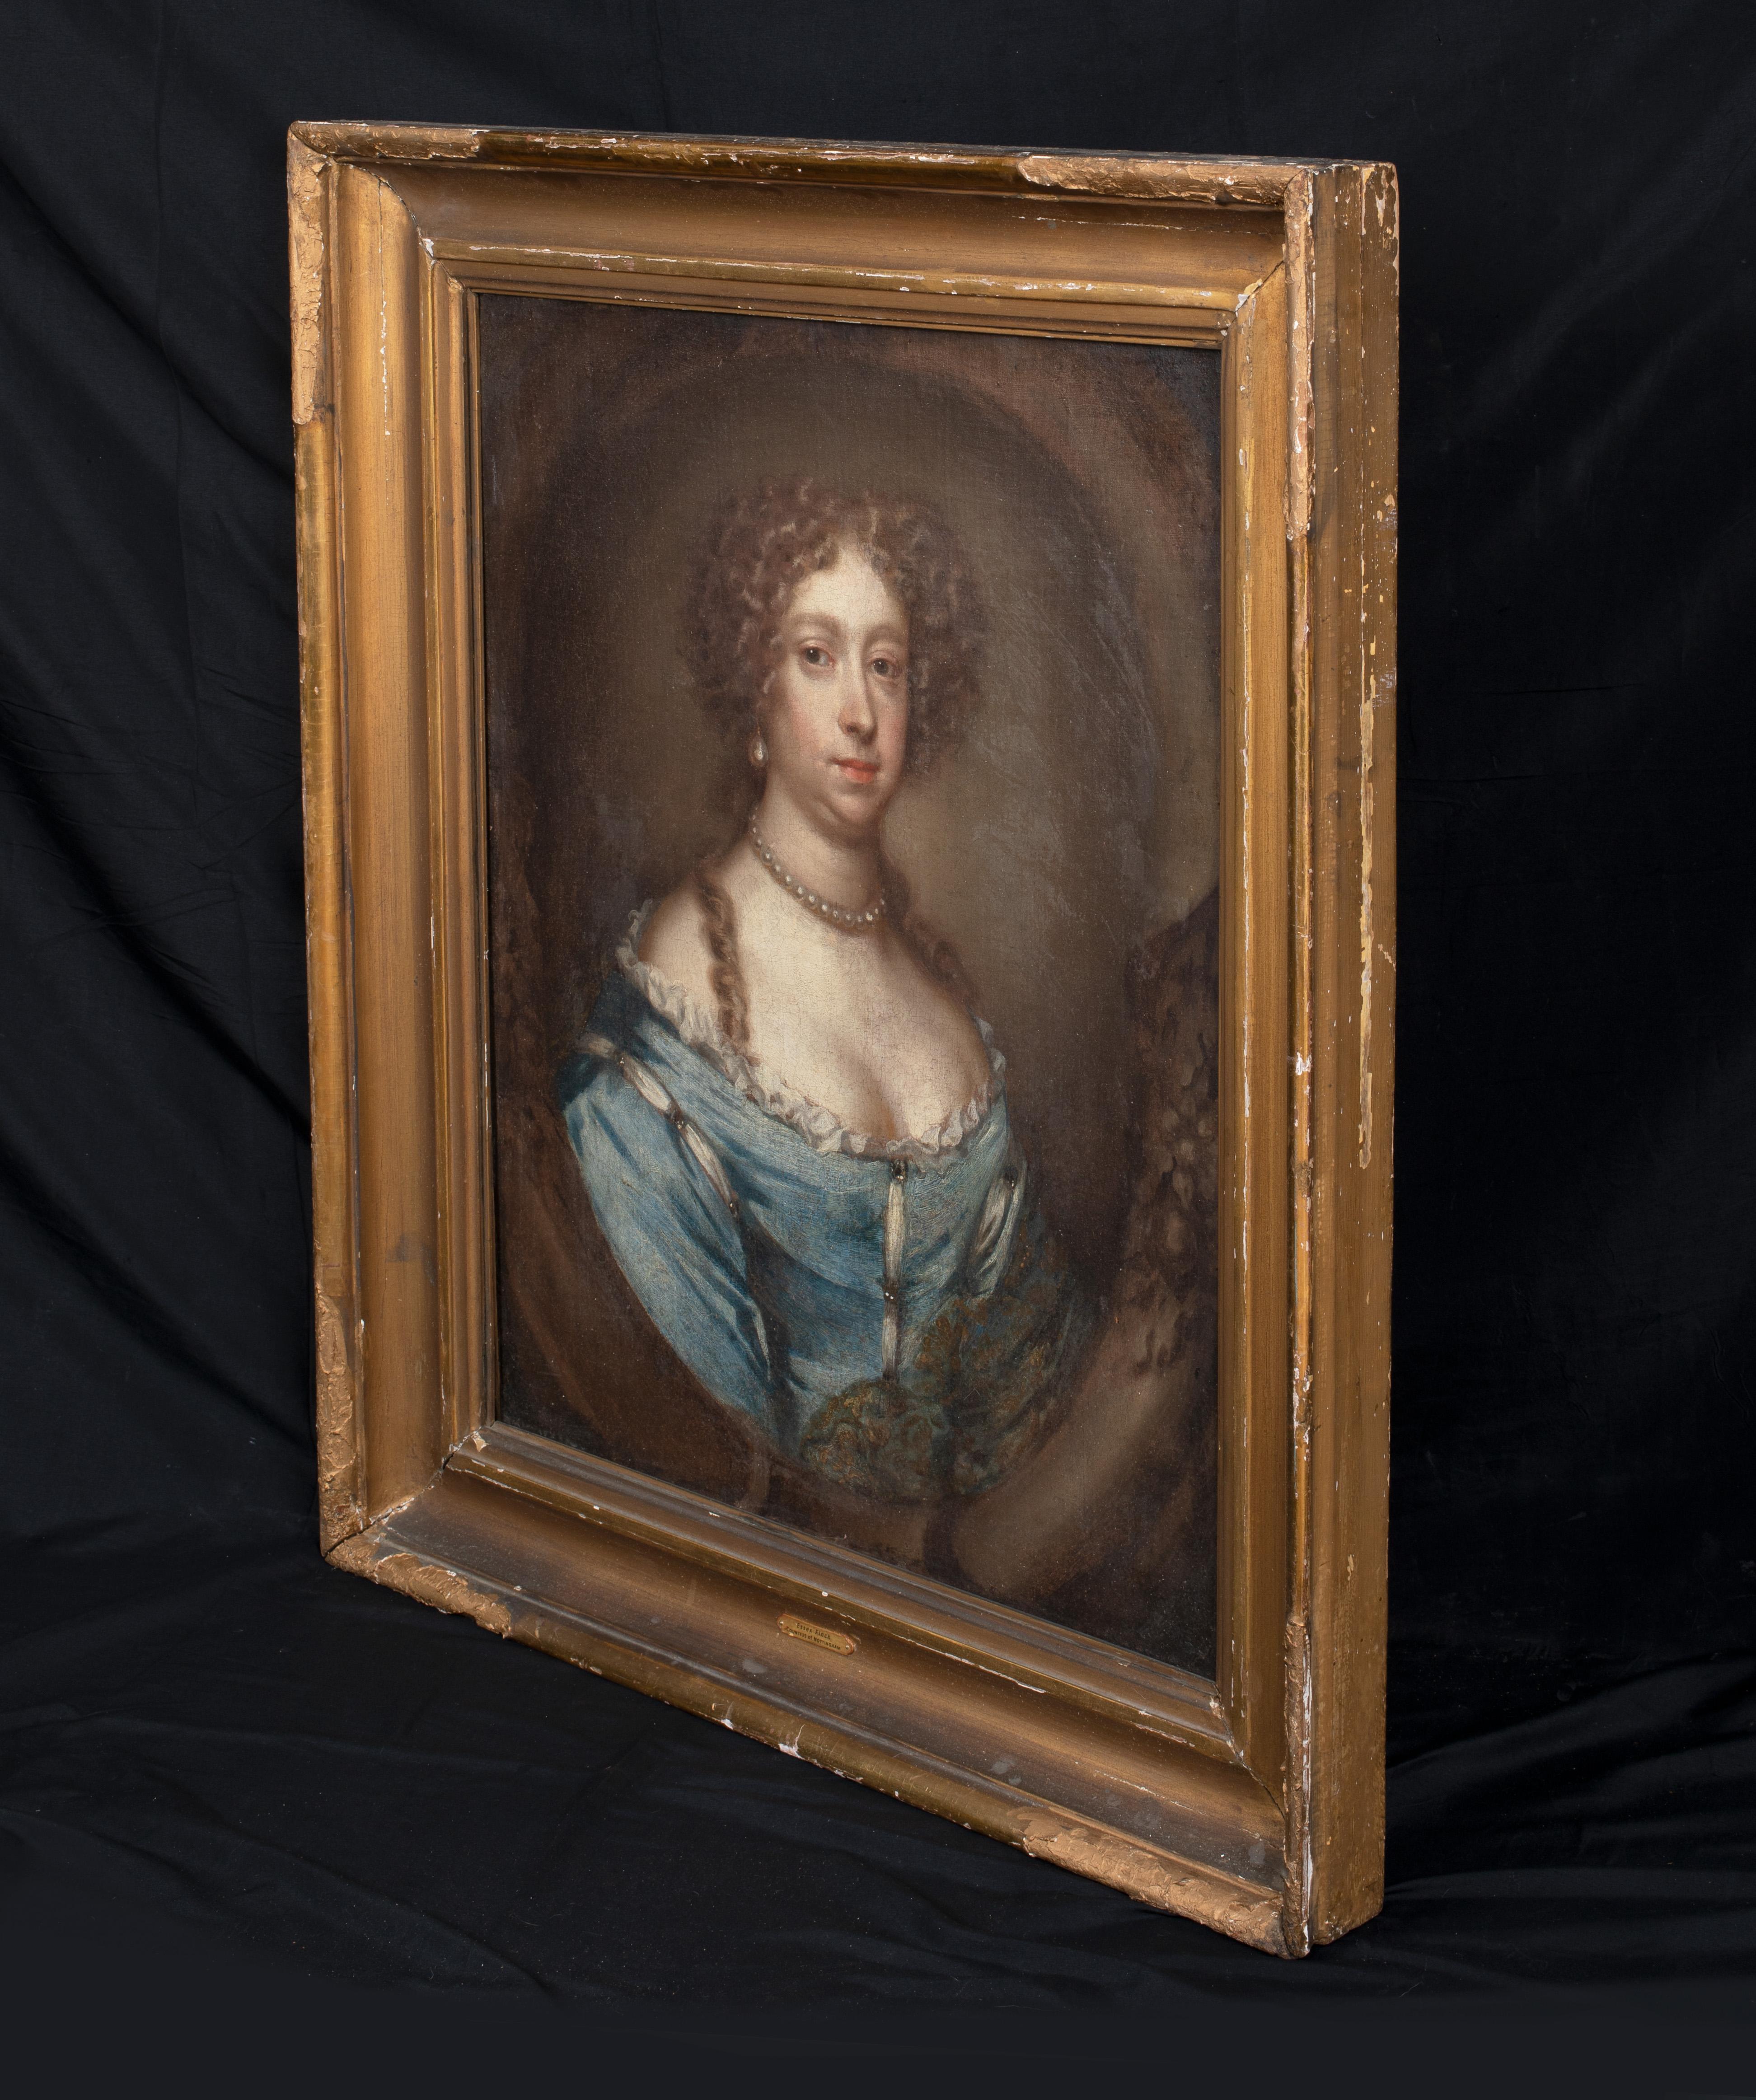 Portrait Of Essex Finch, Countess Of Nottingham, 17th Century 

circle of Sir Peter LELY (1618-1680)

Large 17th Century English Old Master portrait of Essex Finch, Countess Of Nottingham, oil on canvas from the circle of sir Peter Lely. Exceptional